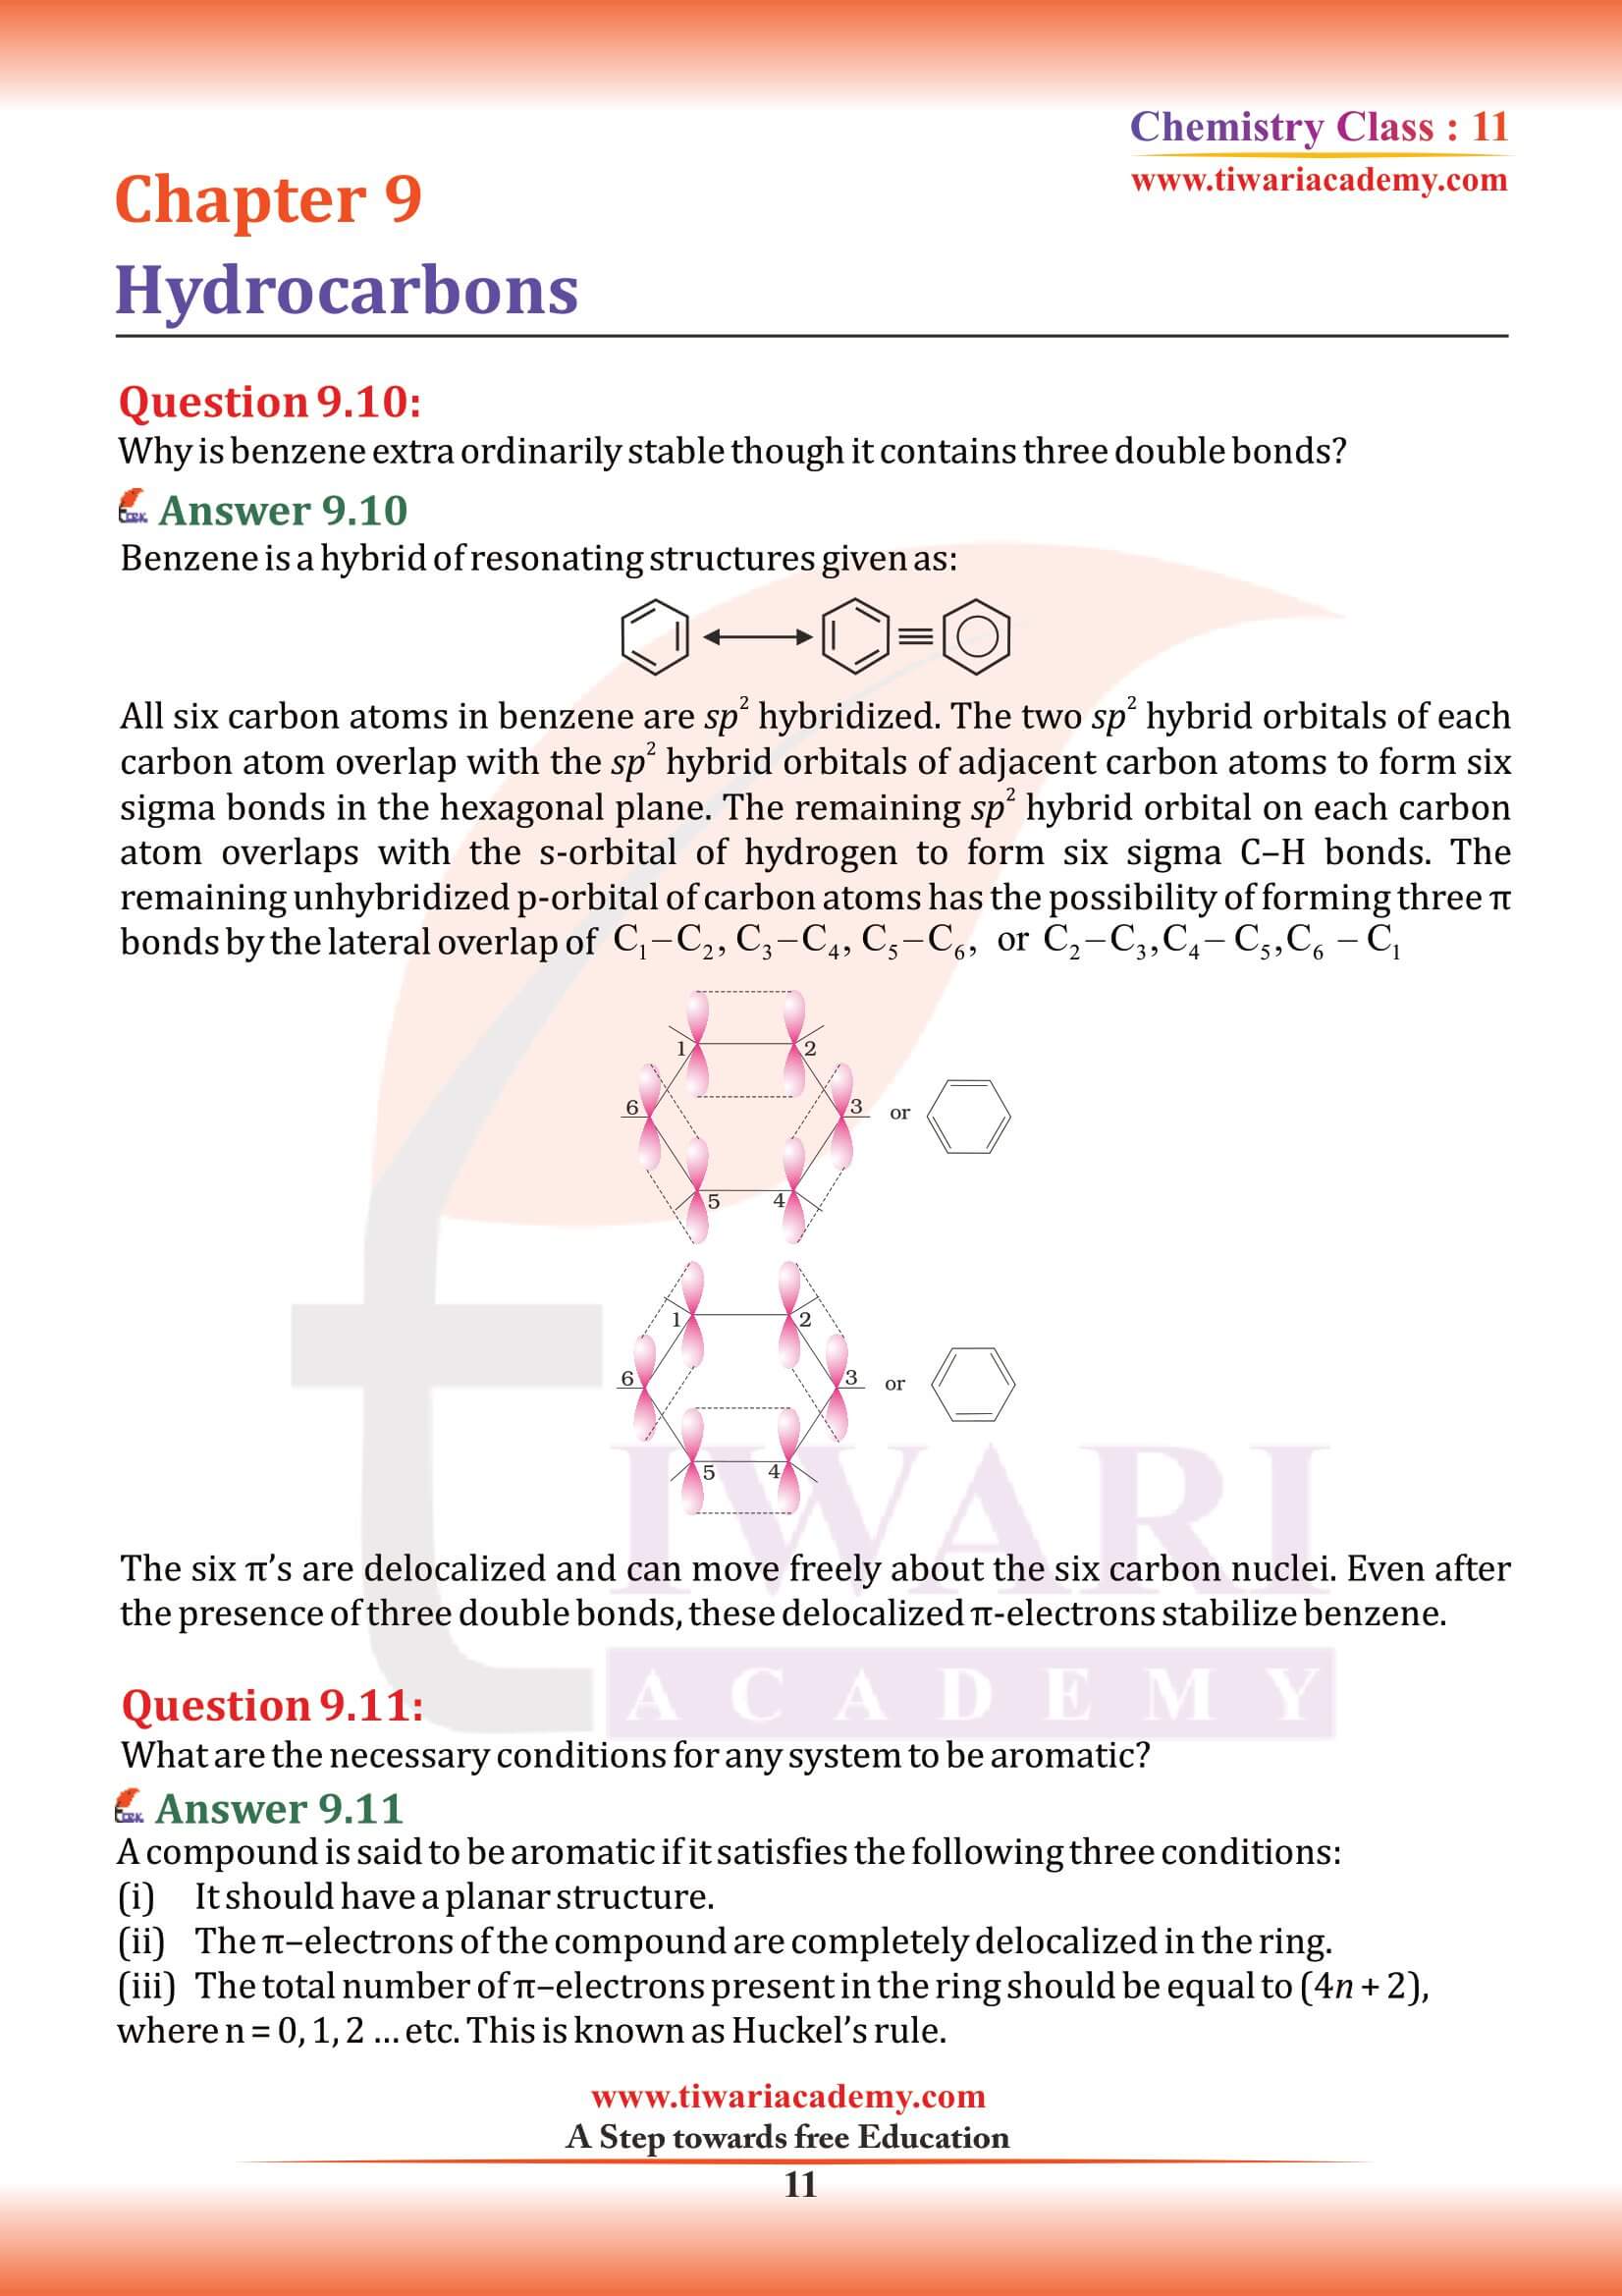 NCERT Class 11 Chemistry Chapter 9 free use